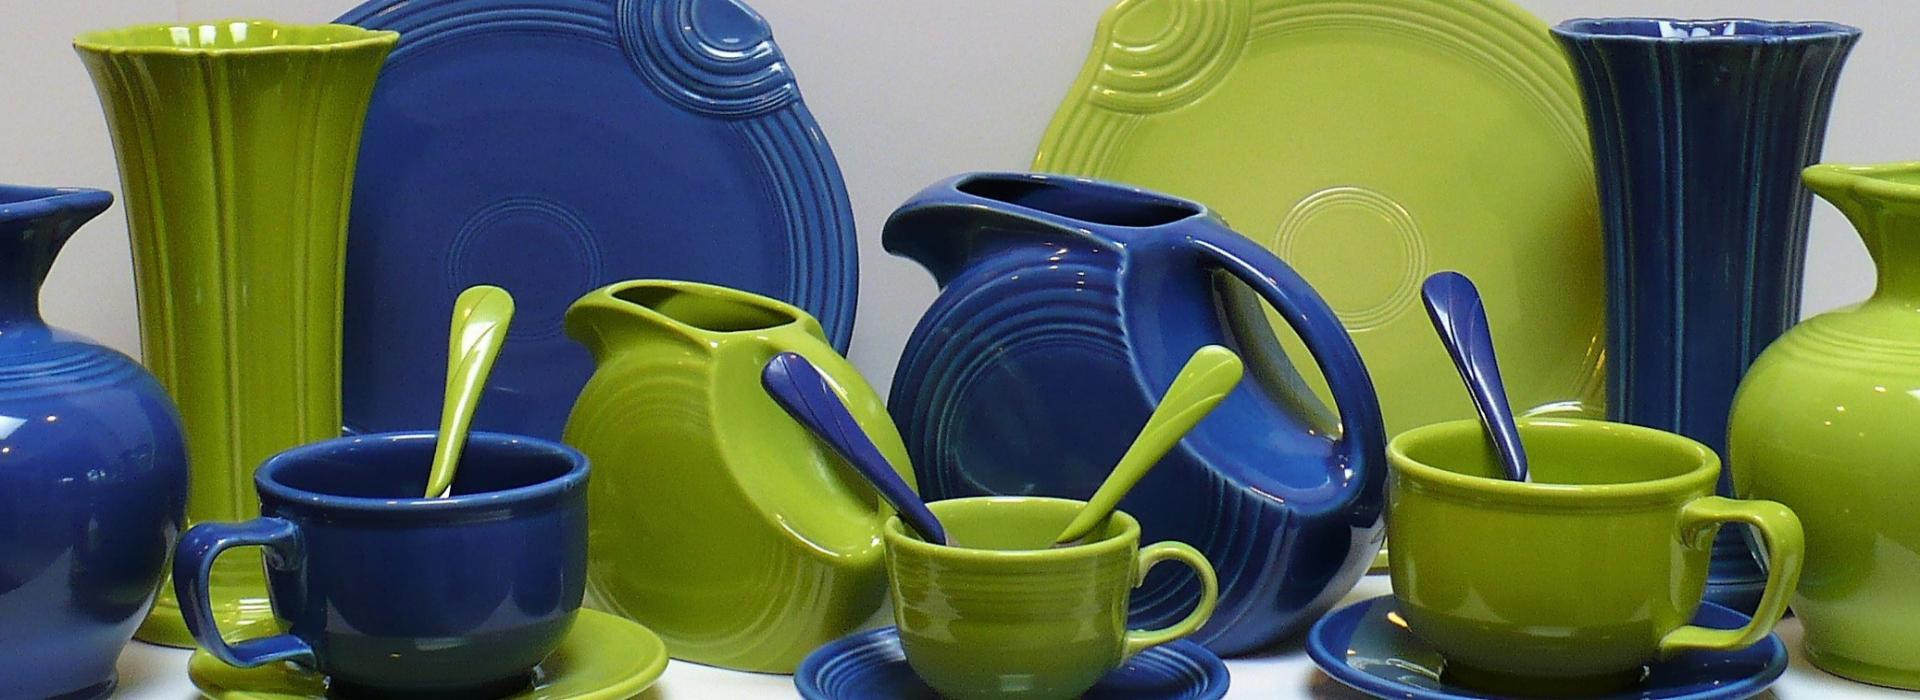 23 Famous Fiestaware Vase Prices 2024 free download fiestaware vase prices of welcome fiestawarestore com intended for dinnerware image slider background image